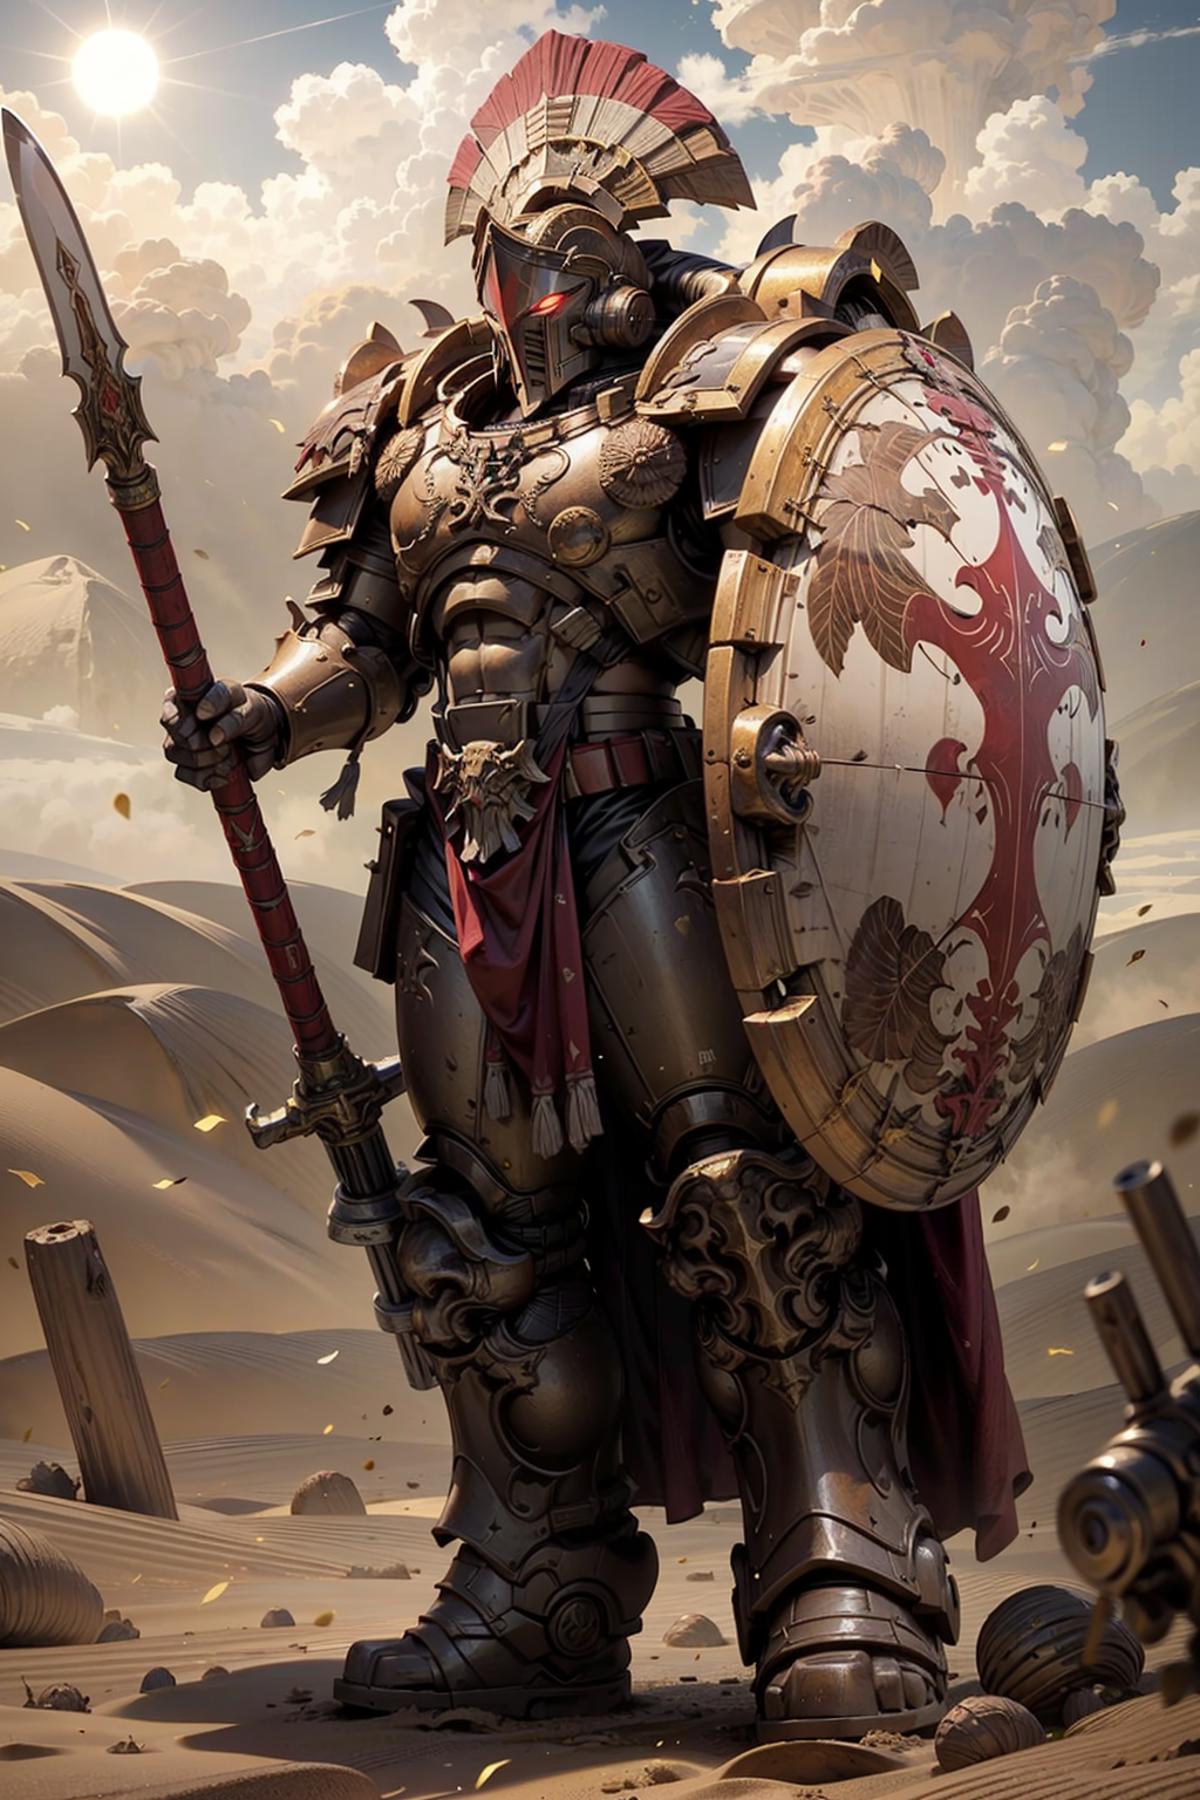 A warrior figure in a fantasy setting holding a spear and a shield.